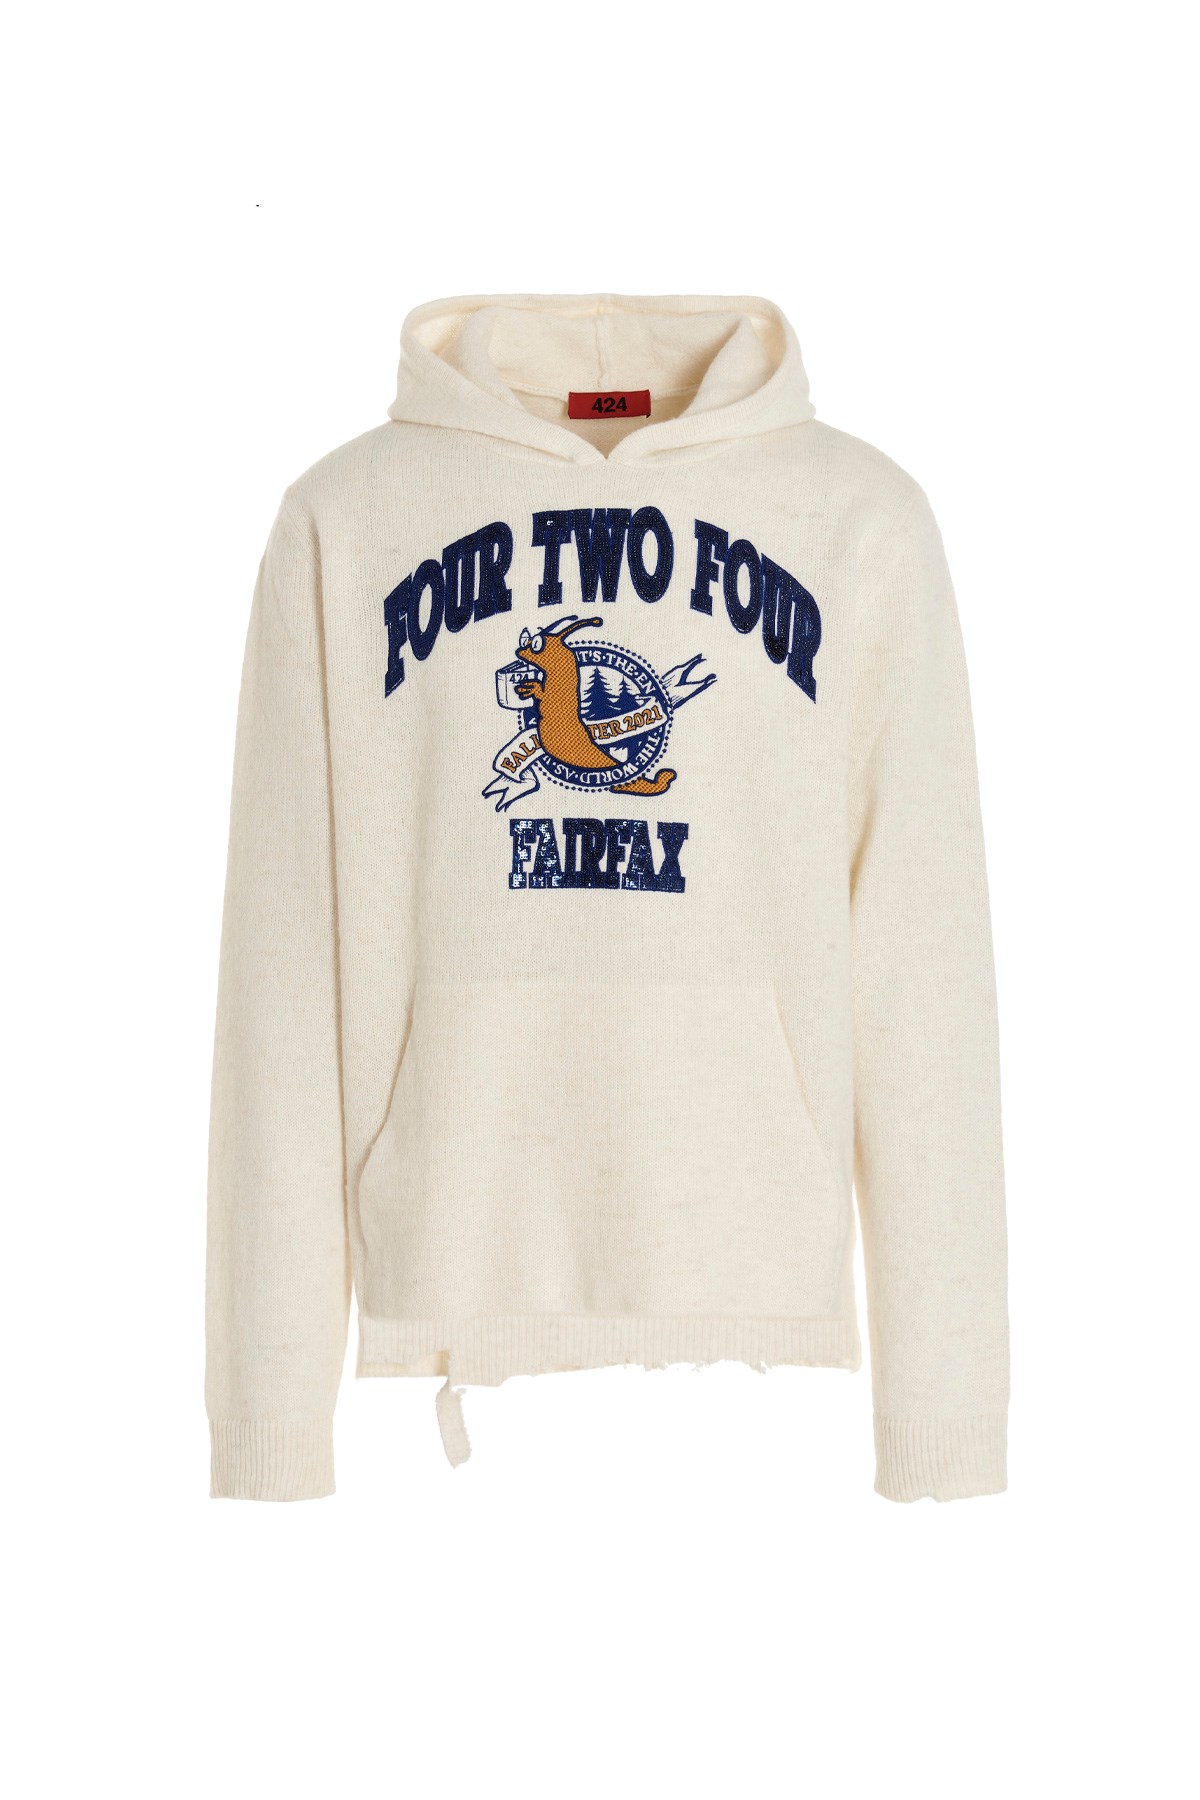 424 'Ftf’ Hooded Sweater